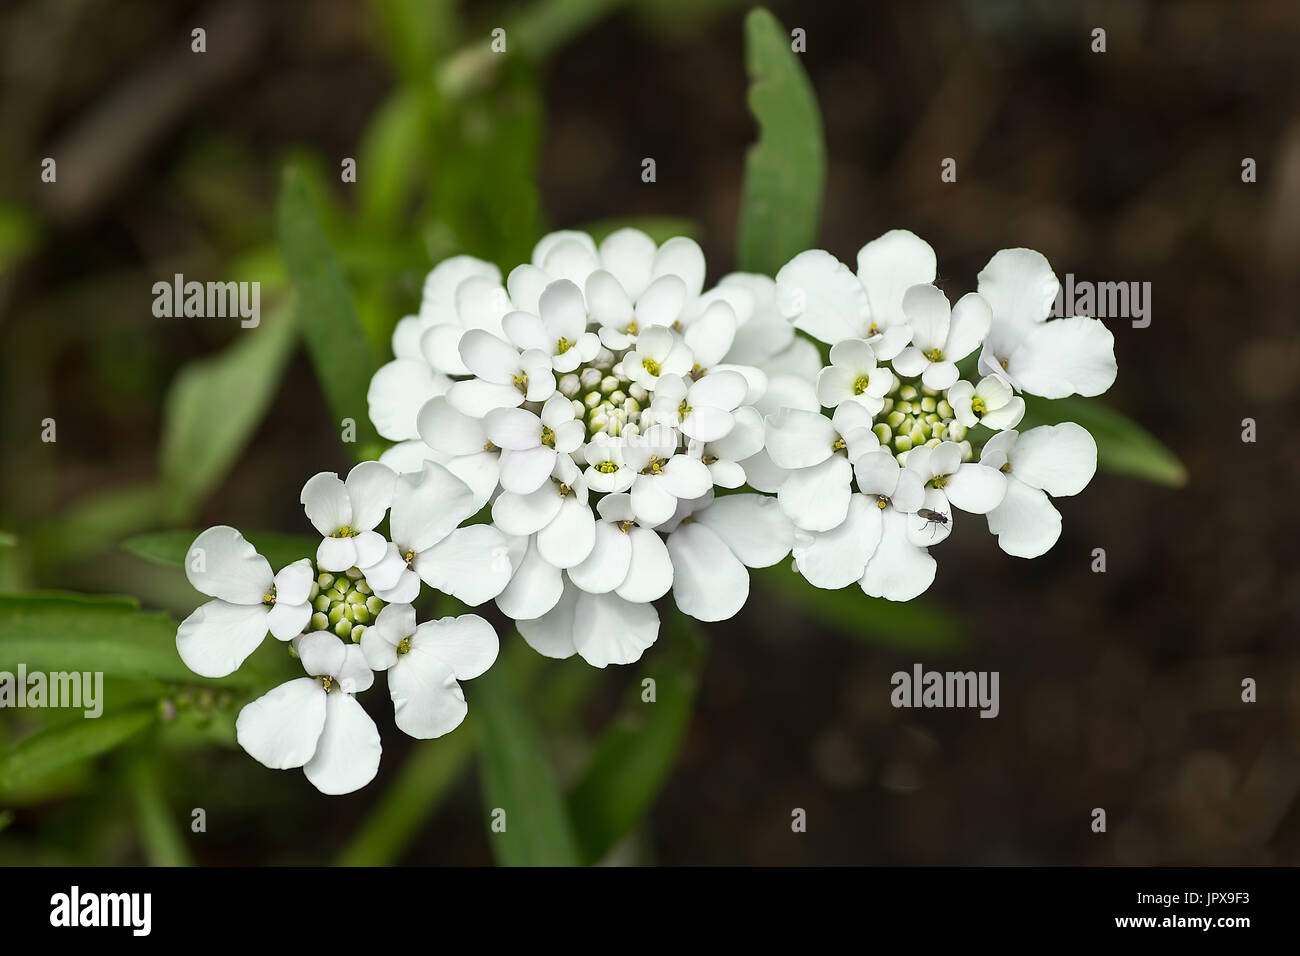 Lilac Candytuft, or Iberis, flowers Stock Photo